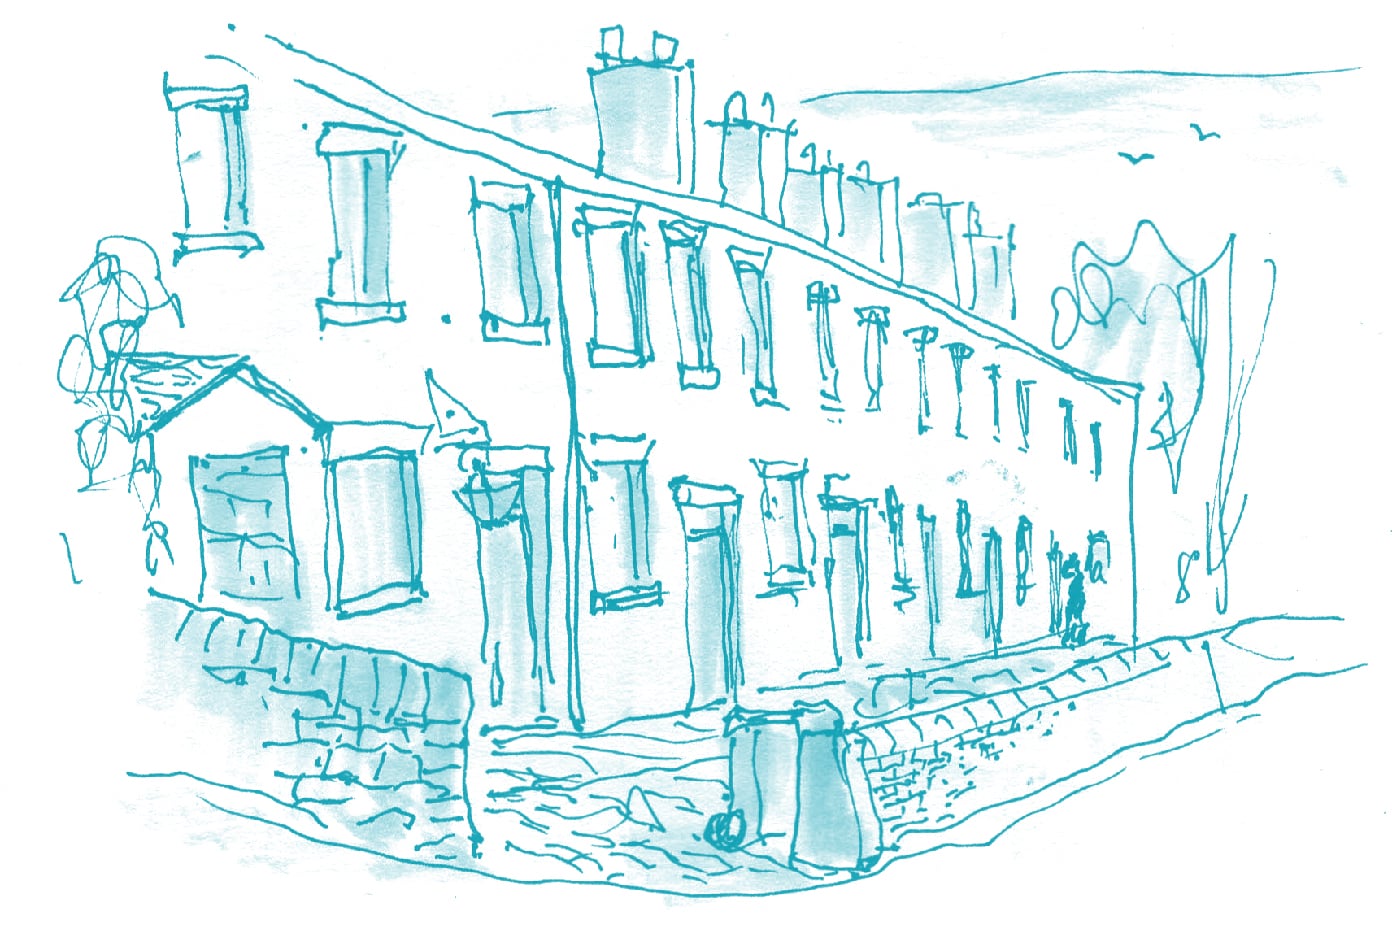 An illustration of Mossley